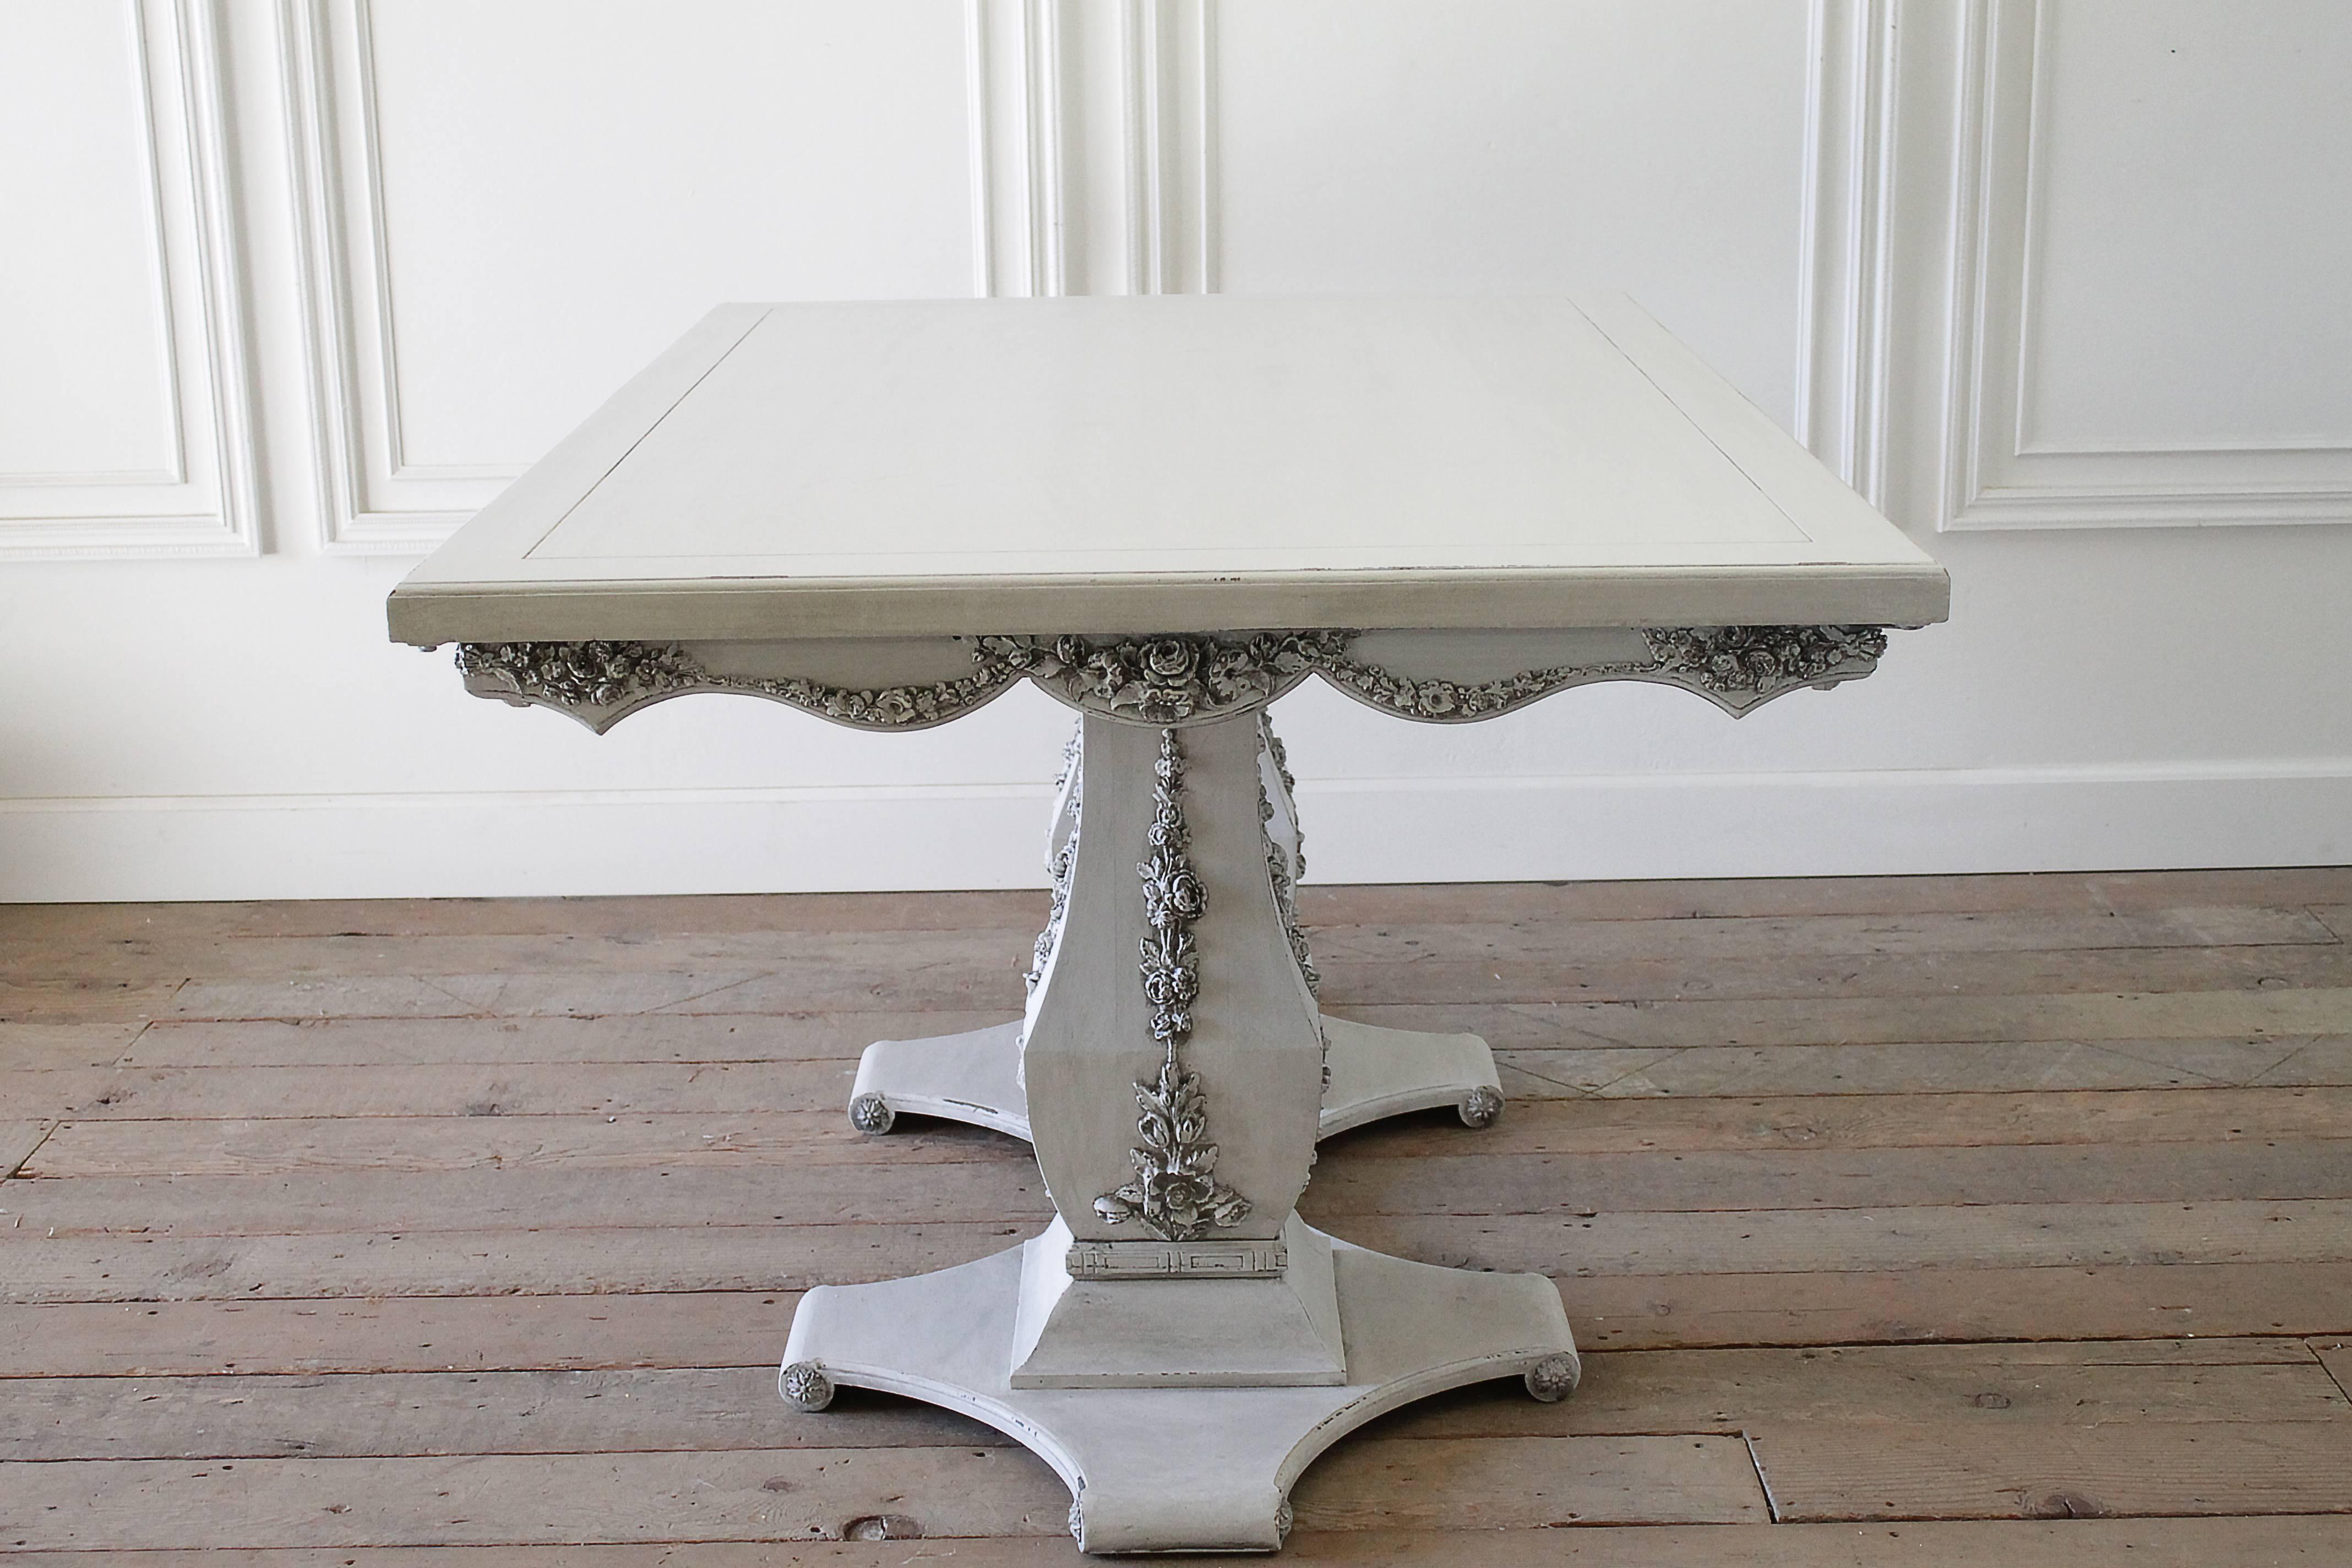 Mid-Century carved dining table with double pedestal base has been painted in our oyster white with distressed and hand glazed finish.
All of the carvings are of large cabbage roses, and are original to this piece.
The table is sturdy, ready for